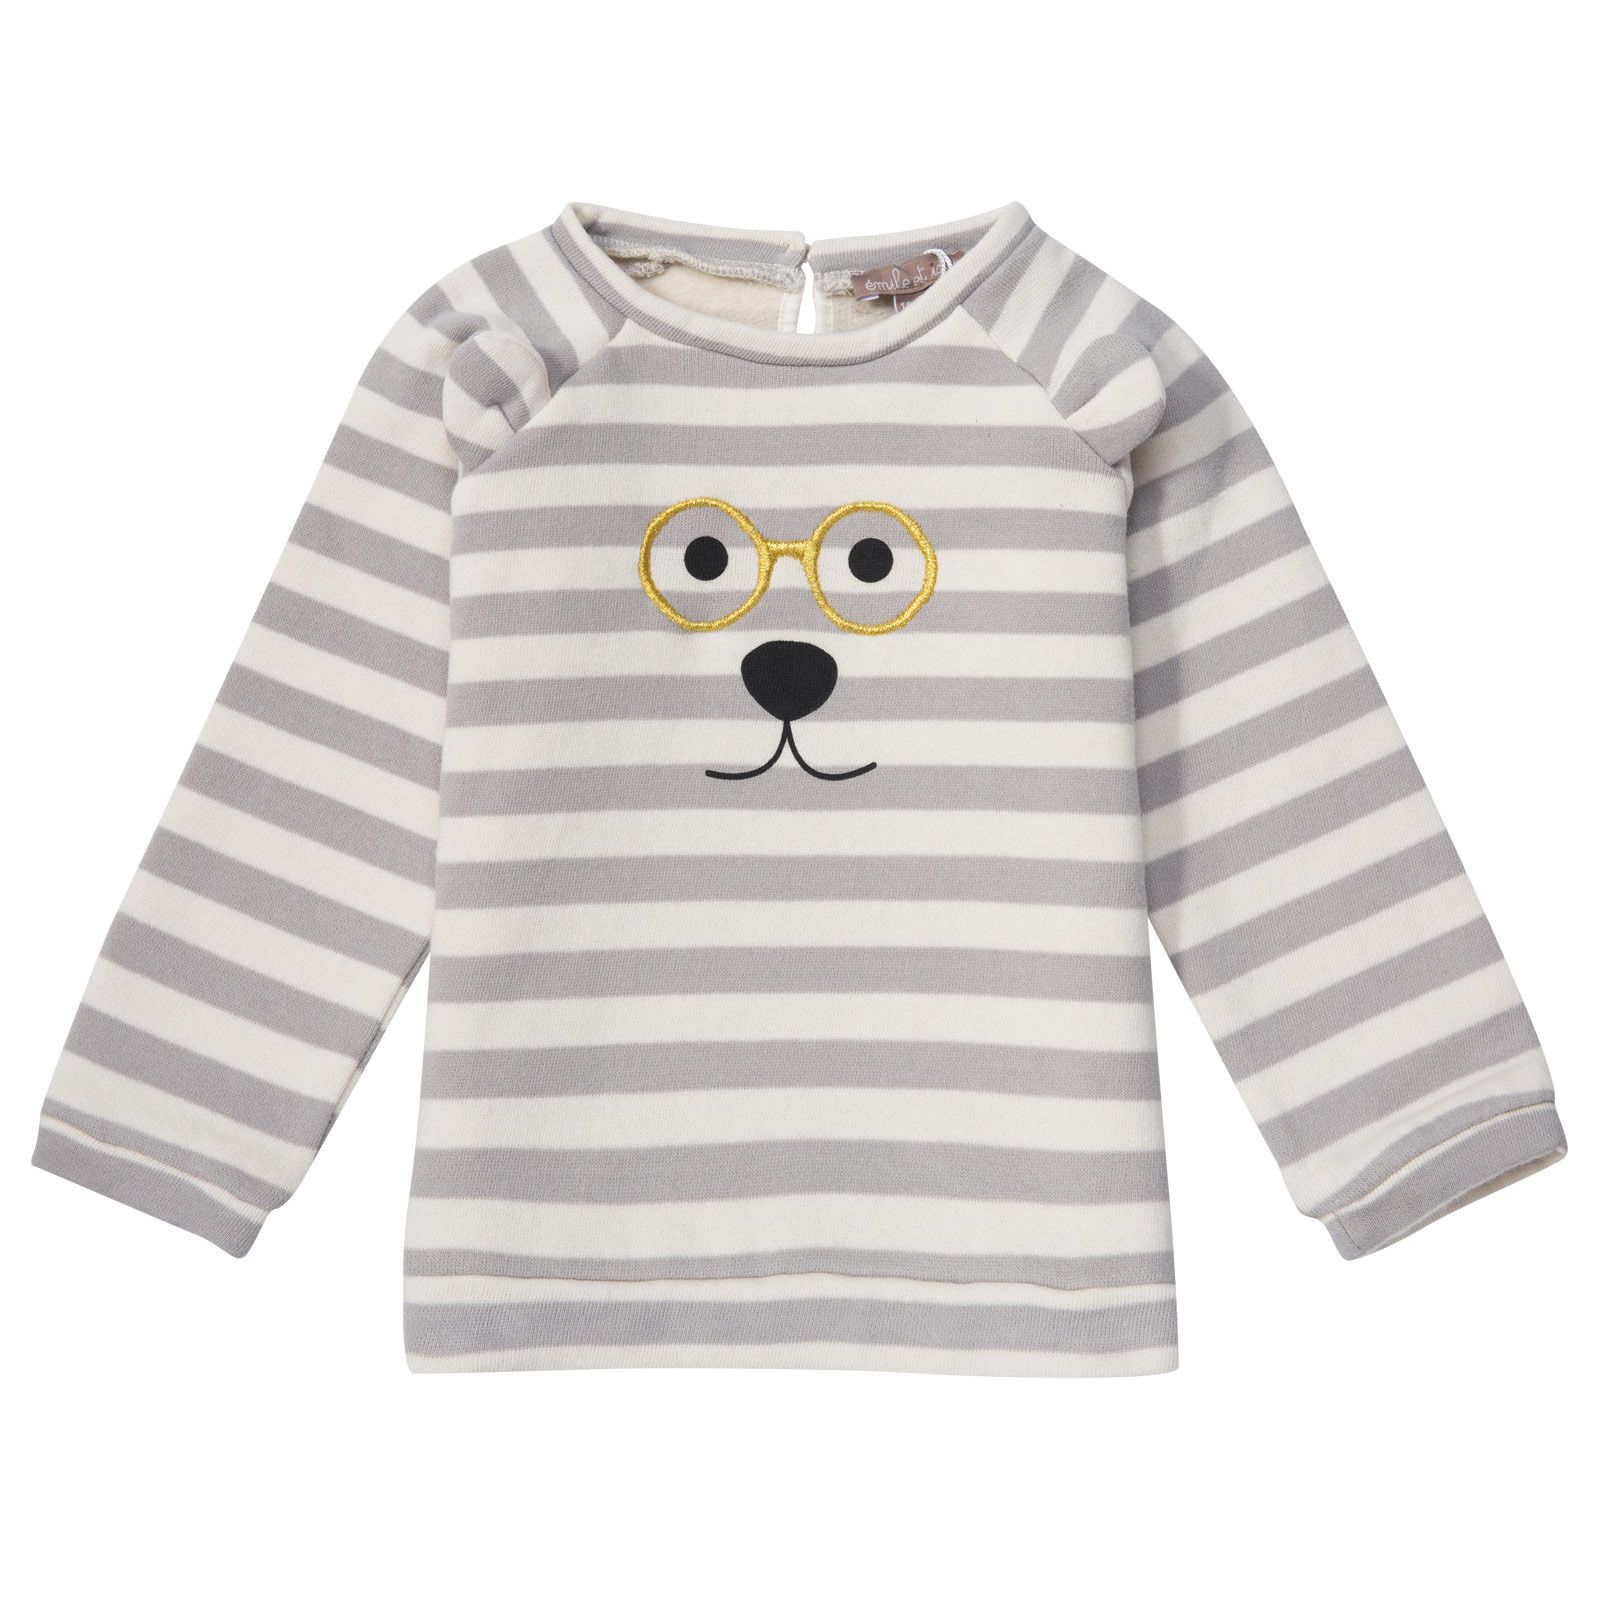 Baby Boys White&Grey Stripe Embroidered Monster Sweater - CÉMAROSE | Children's Fashion Store - 1